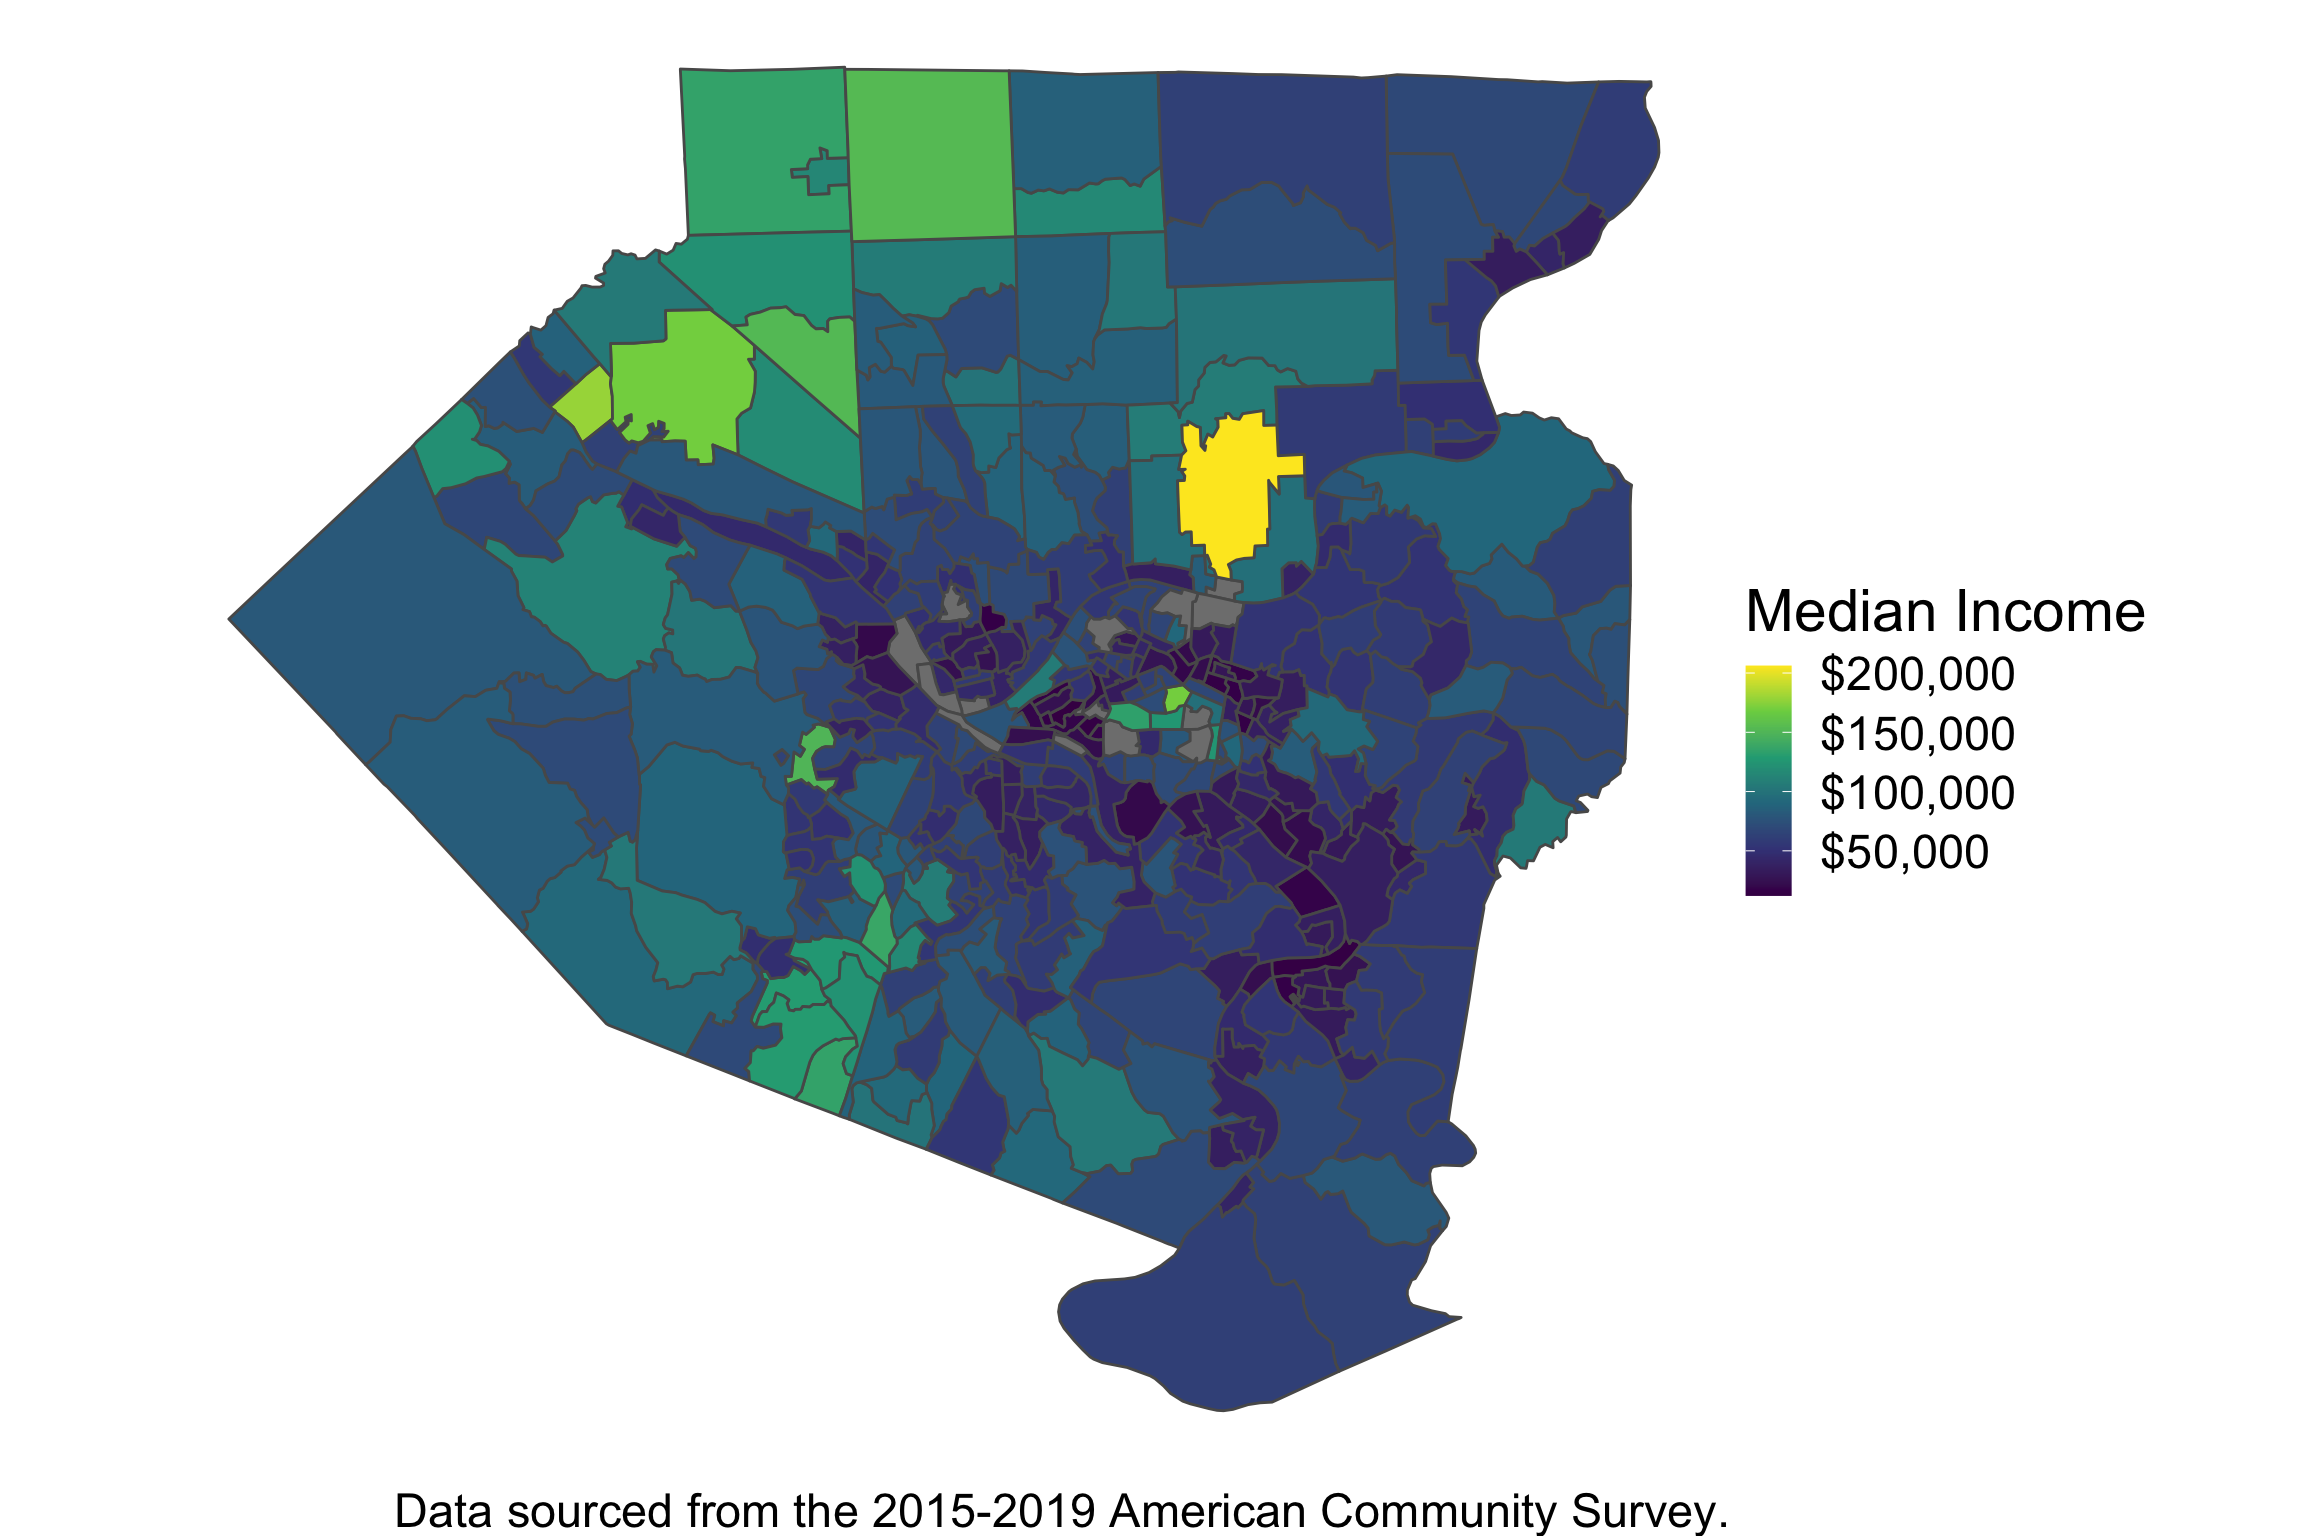 Distribution of Median Income Across Allegheny County, PA Census Tracts. Note the correlation in wealth across space.